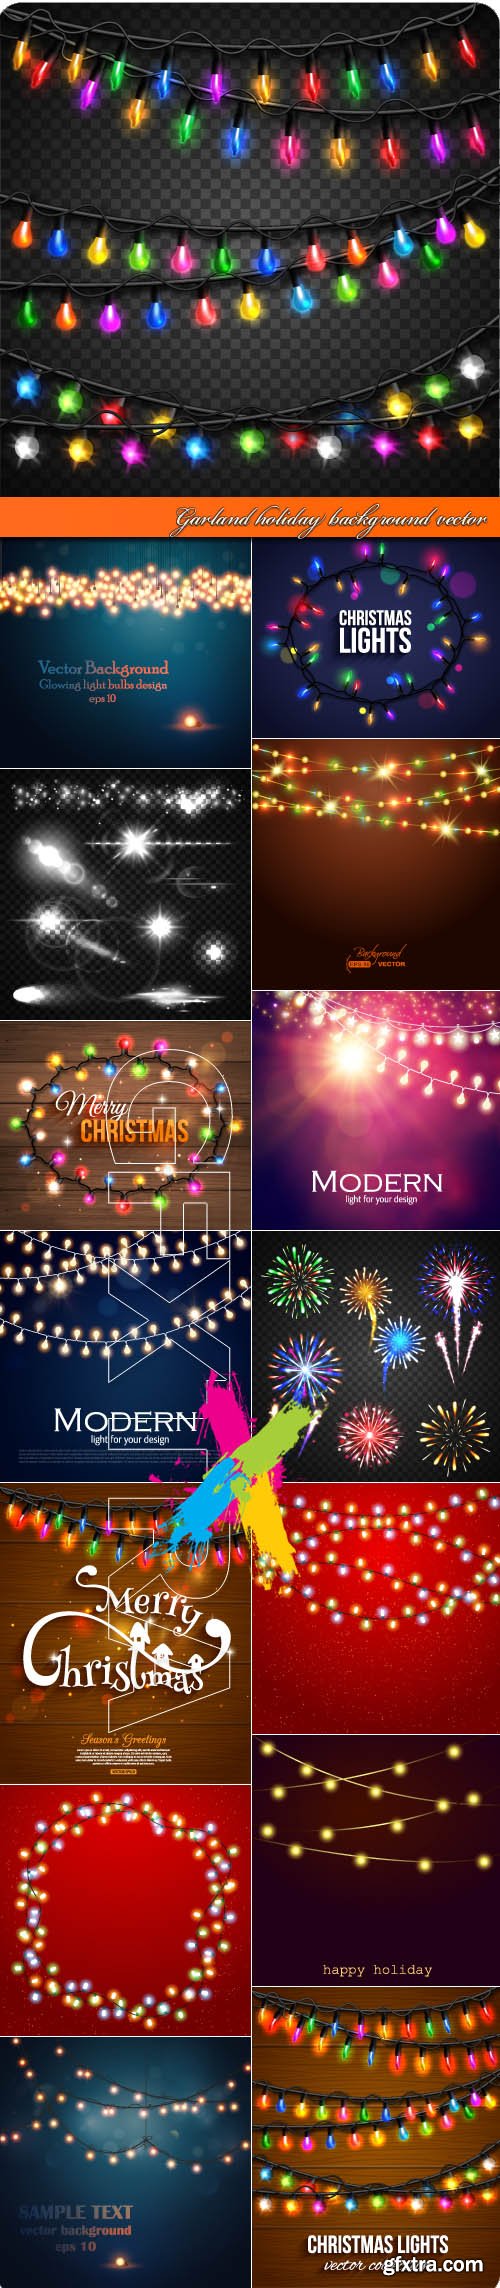 Garland holiday background vector